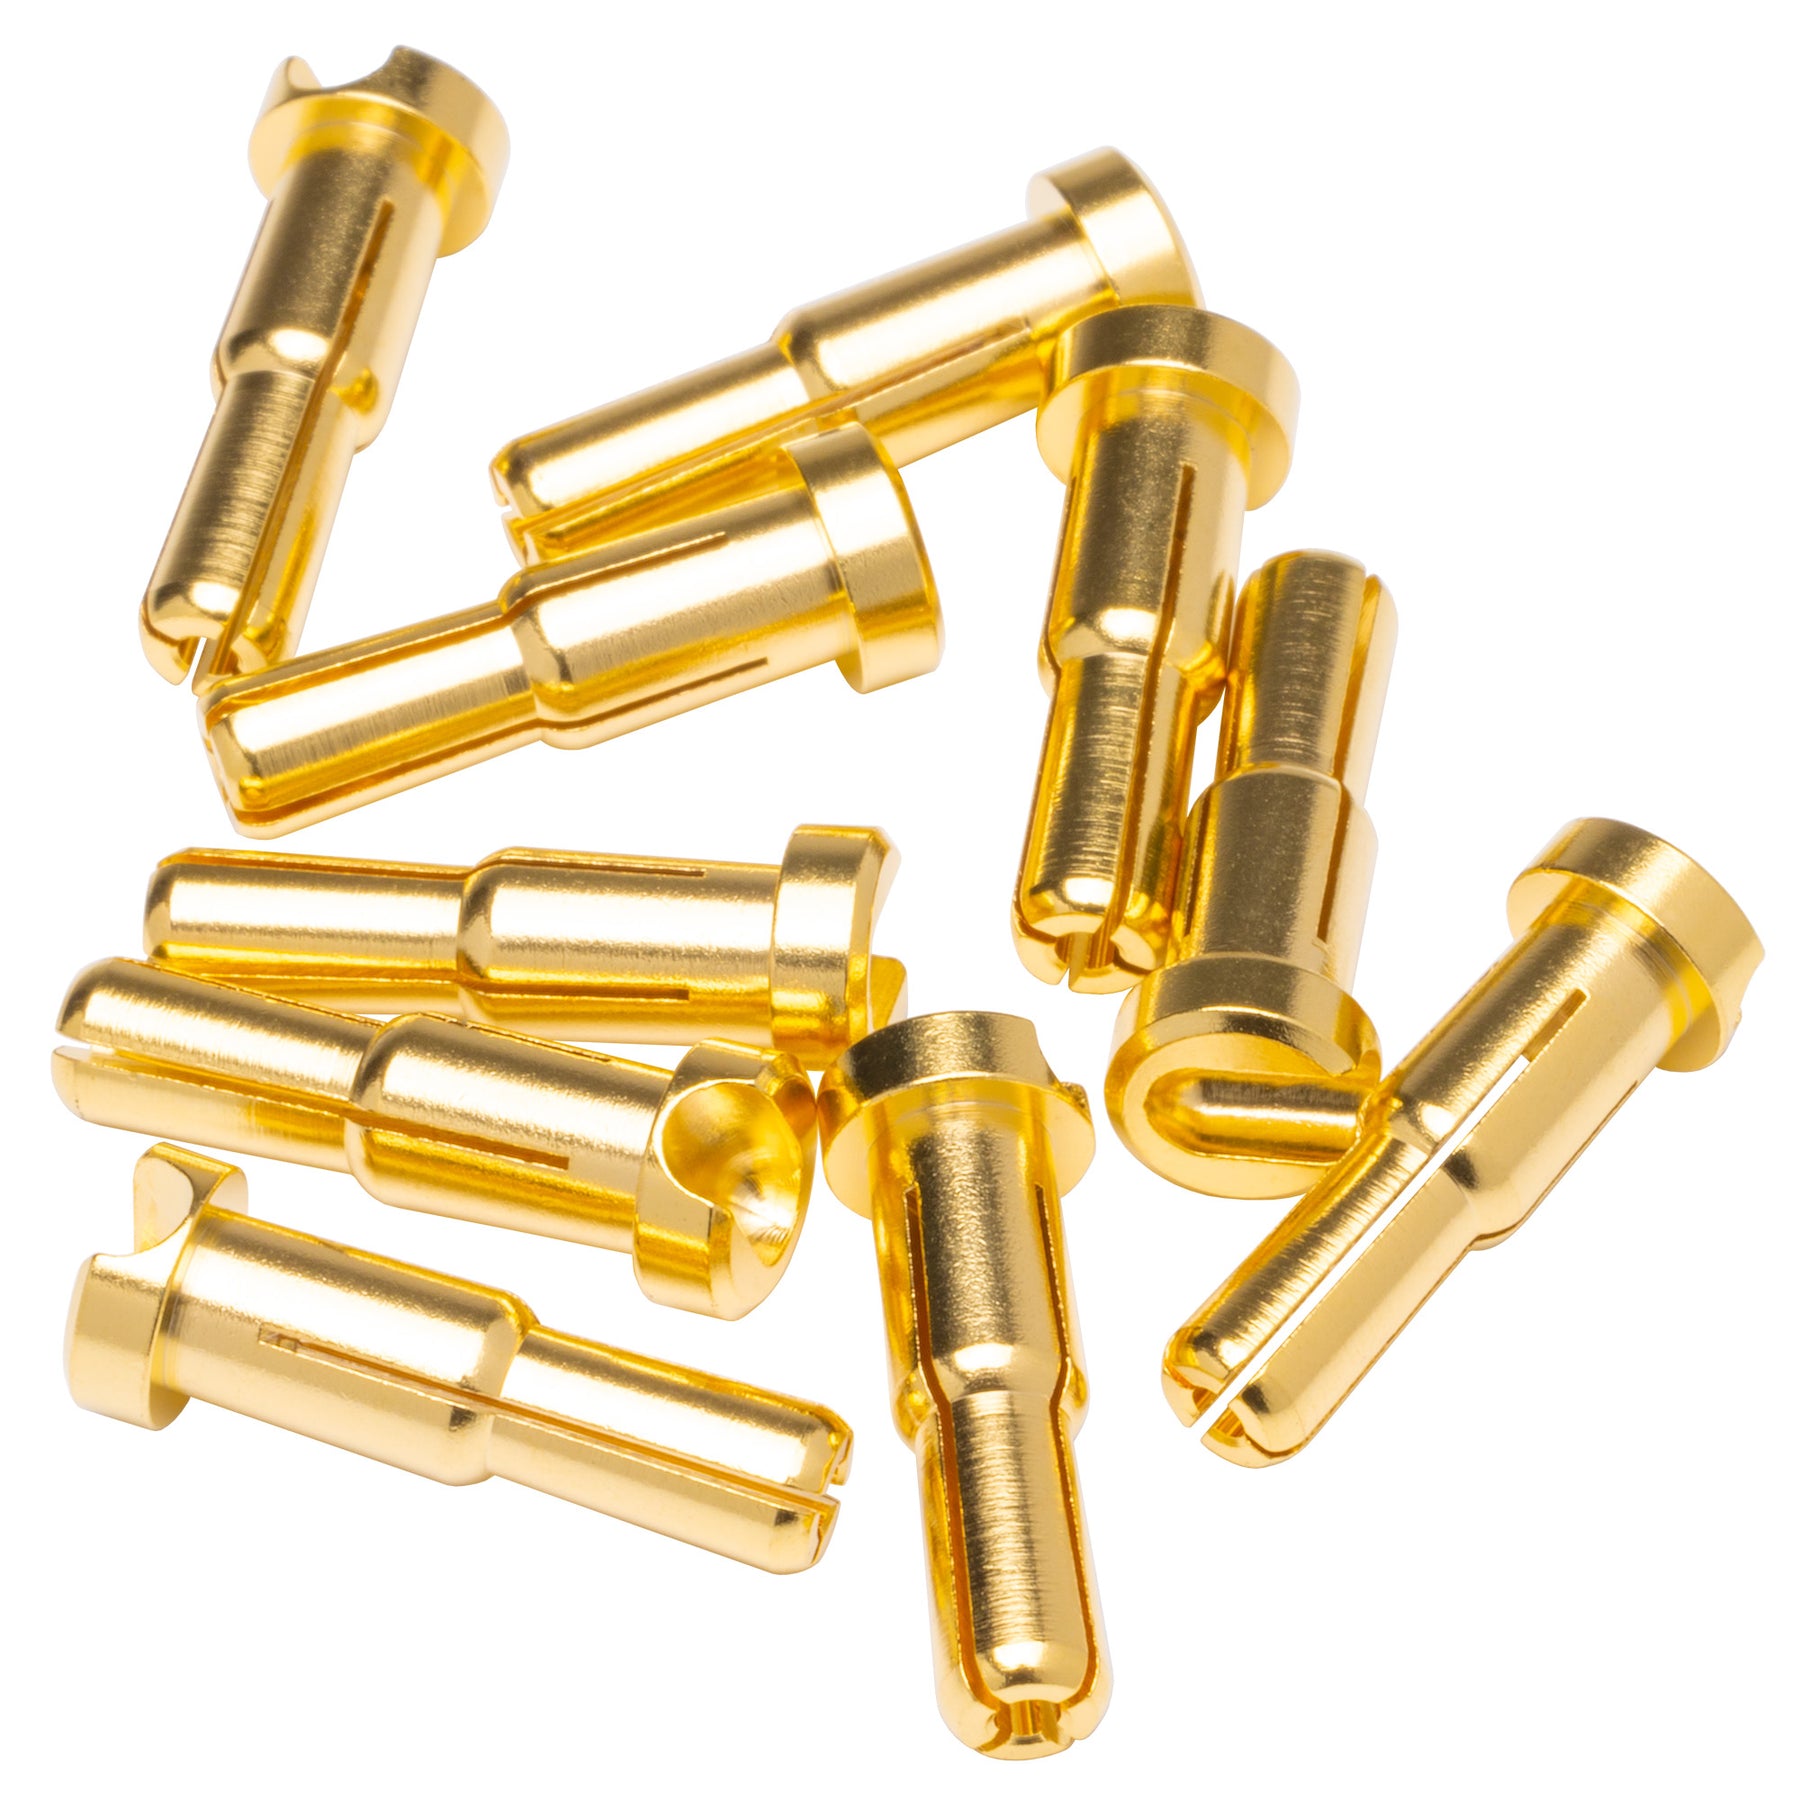 1up Racing LowPro 4-5mm Stepped Bullet Plugs - 10pcs